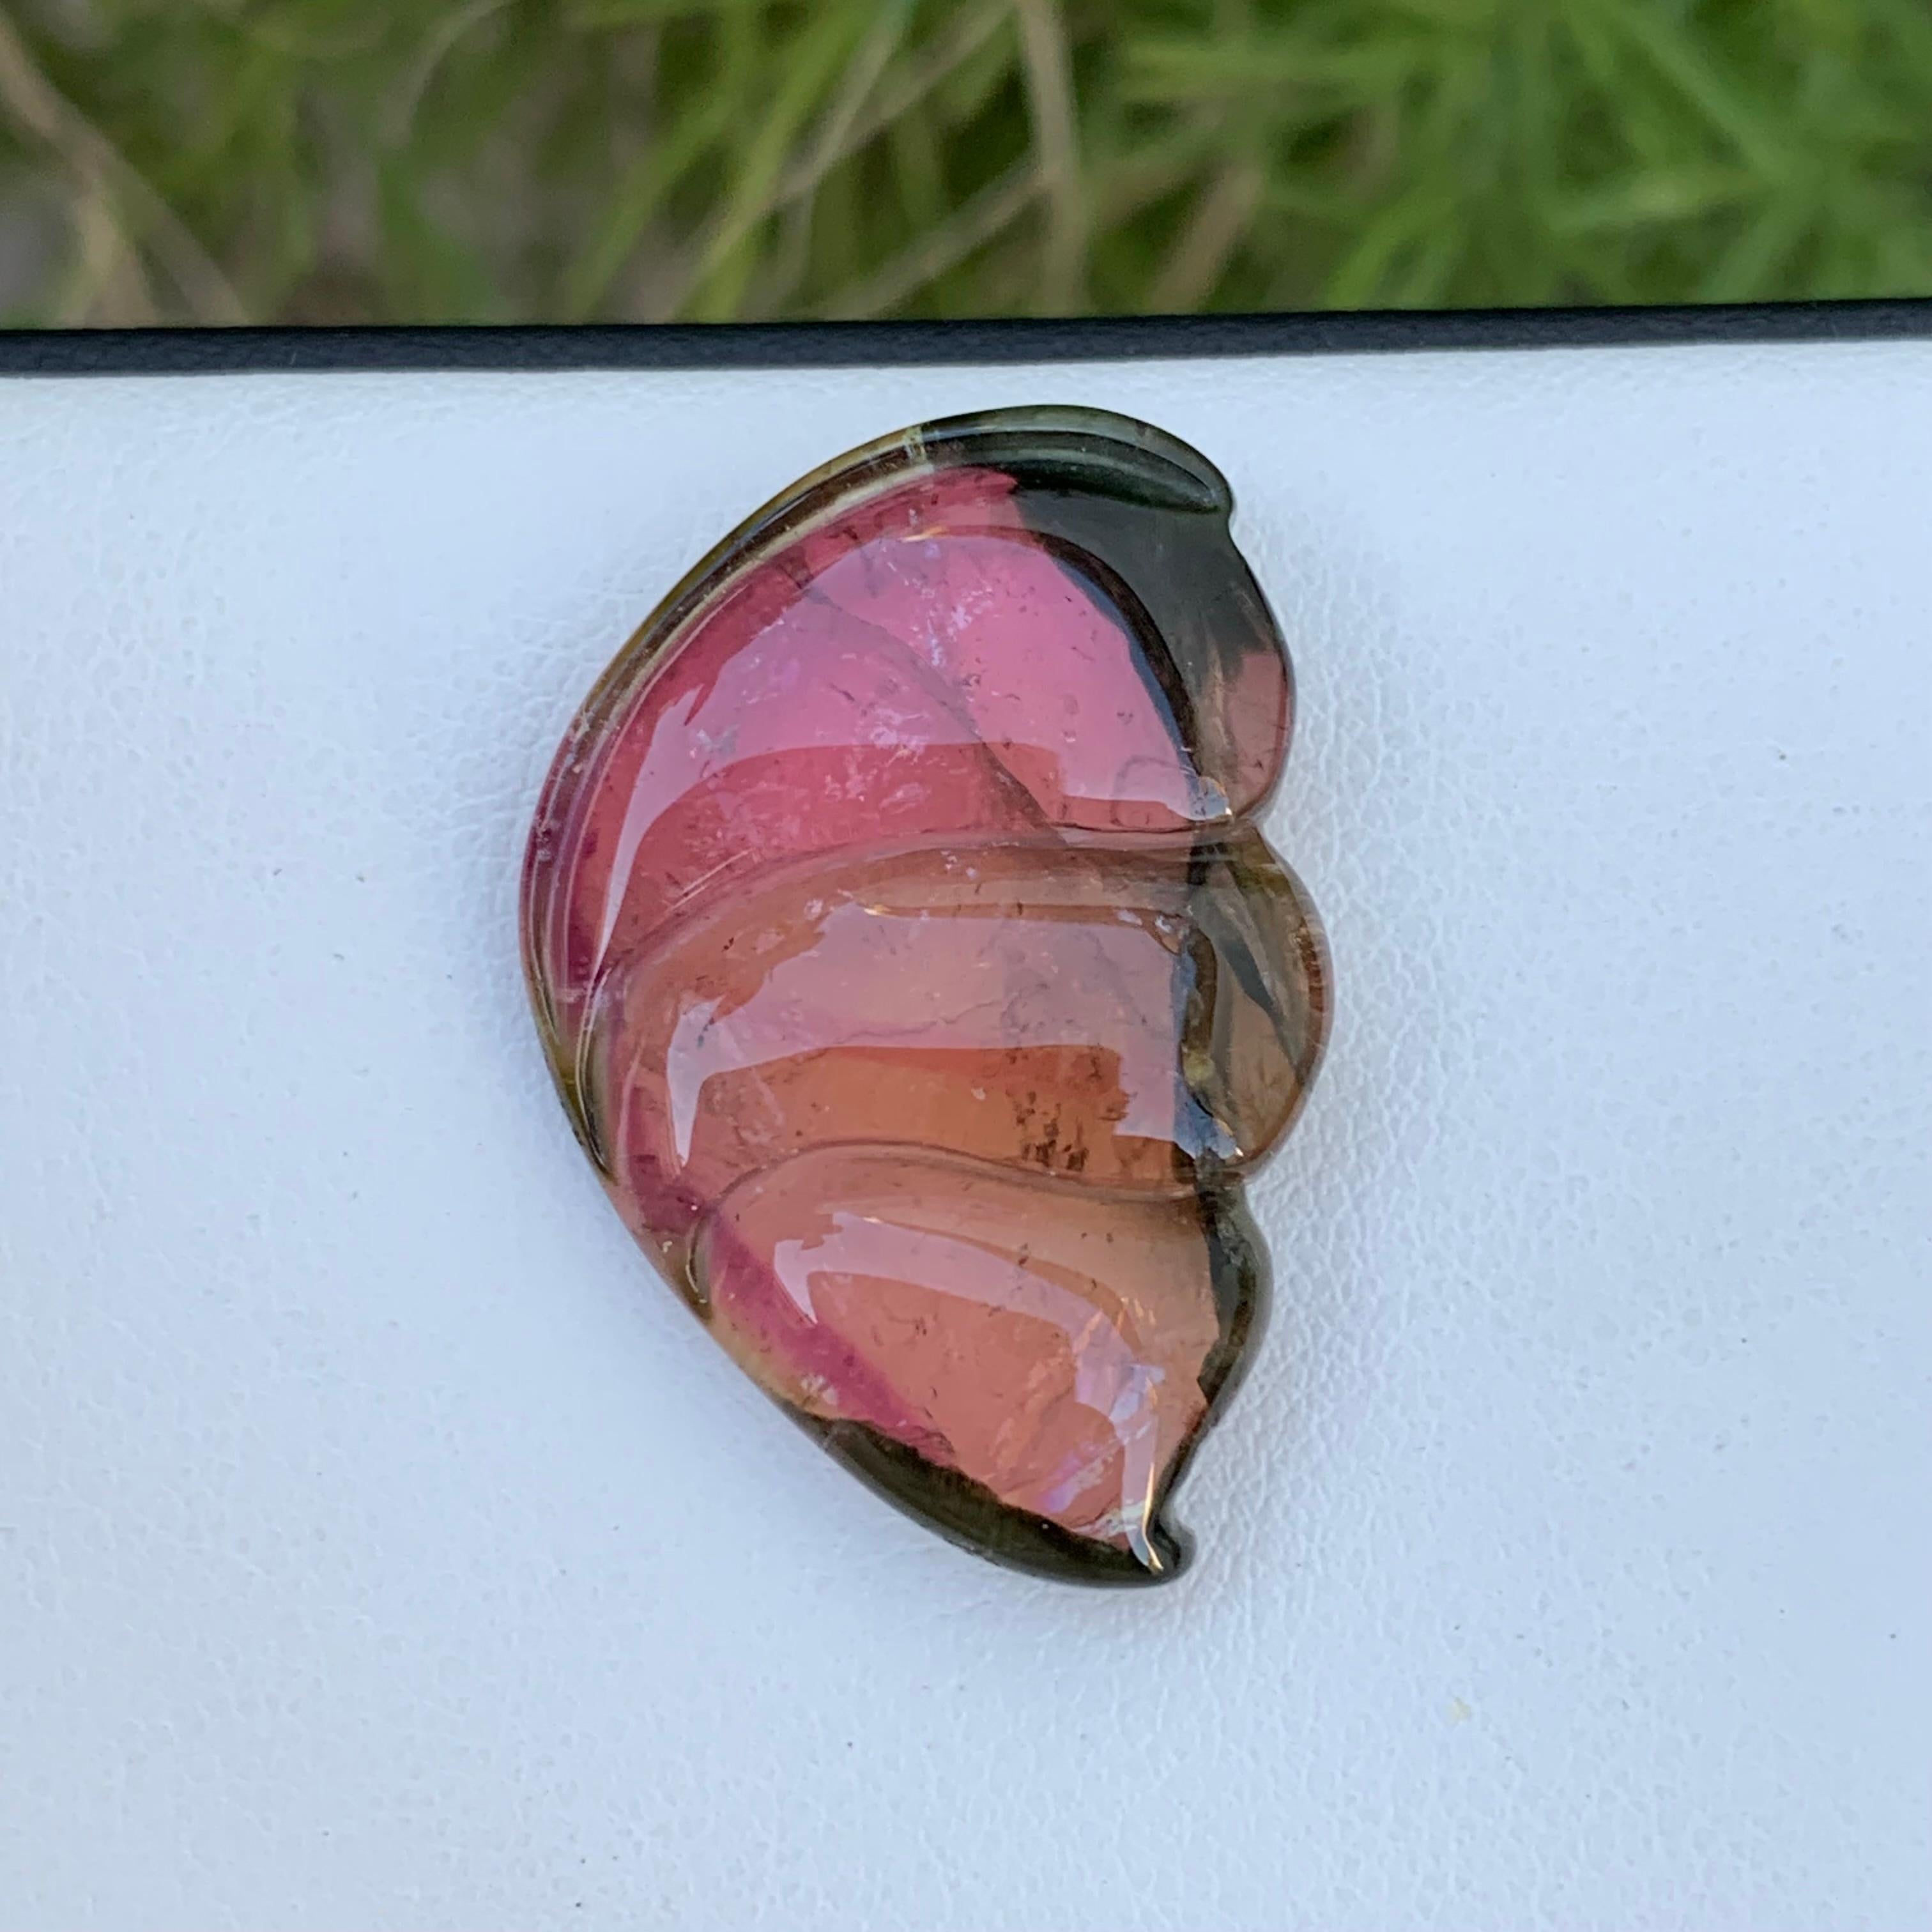 Weight: 26.40Carats
Dimension: 2.8 x 1.9 x 0.5 Cm
Origin: Africa
Colour: Red Pink and Green 
Shape: Carving
Quality: AAA
Tourmaline helps to create a shield around a person or room to prevent negative or unwelcome energies from entering. It is also